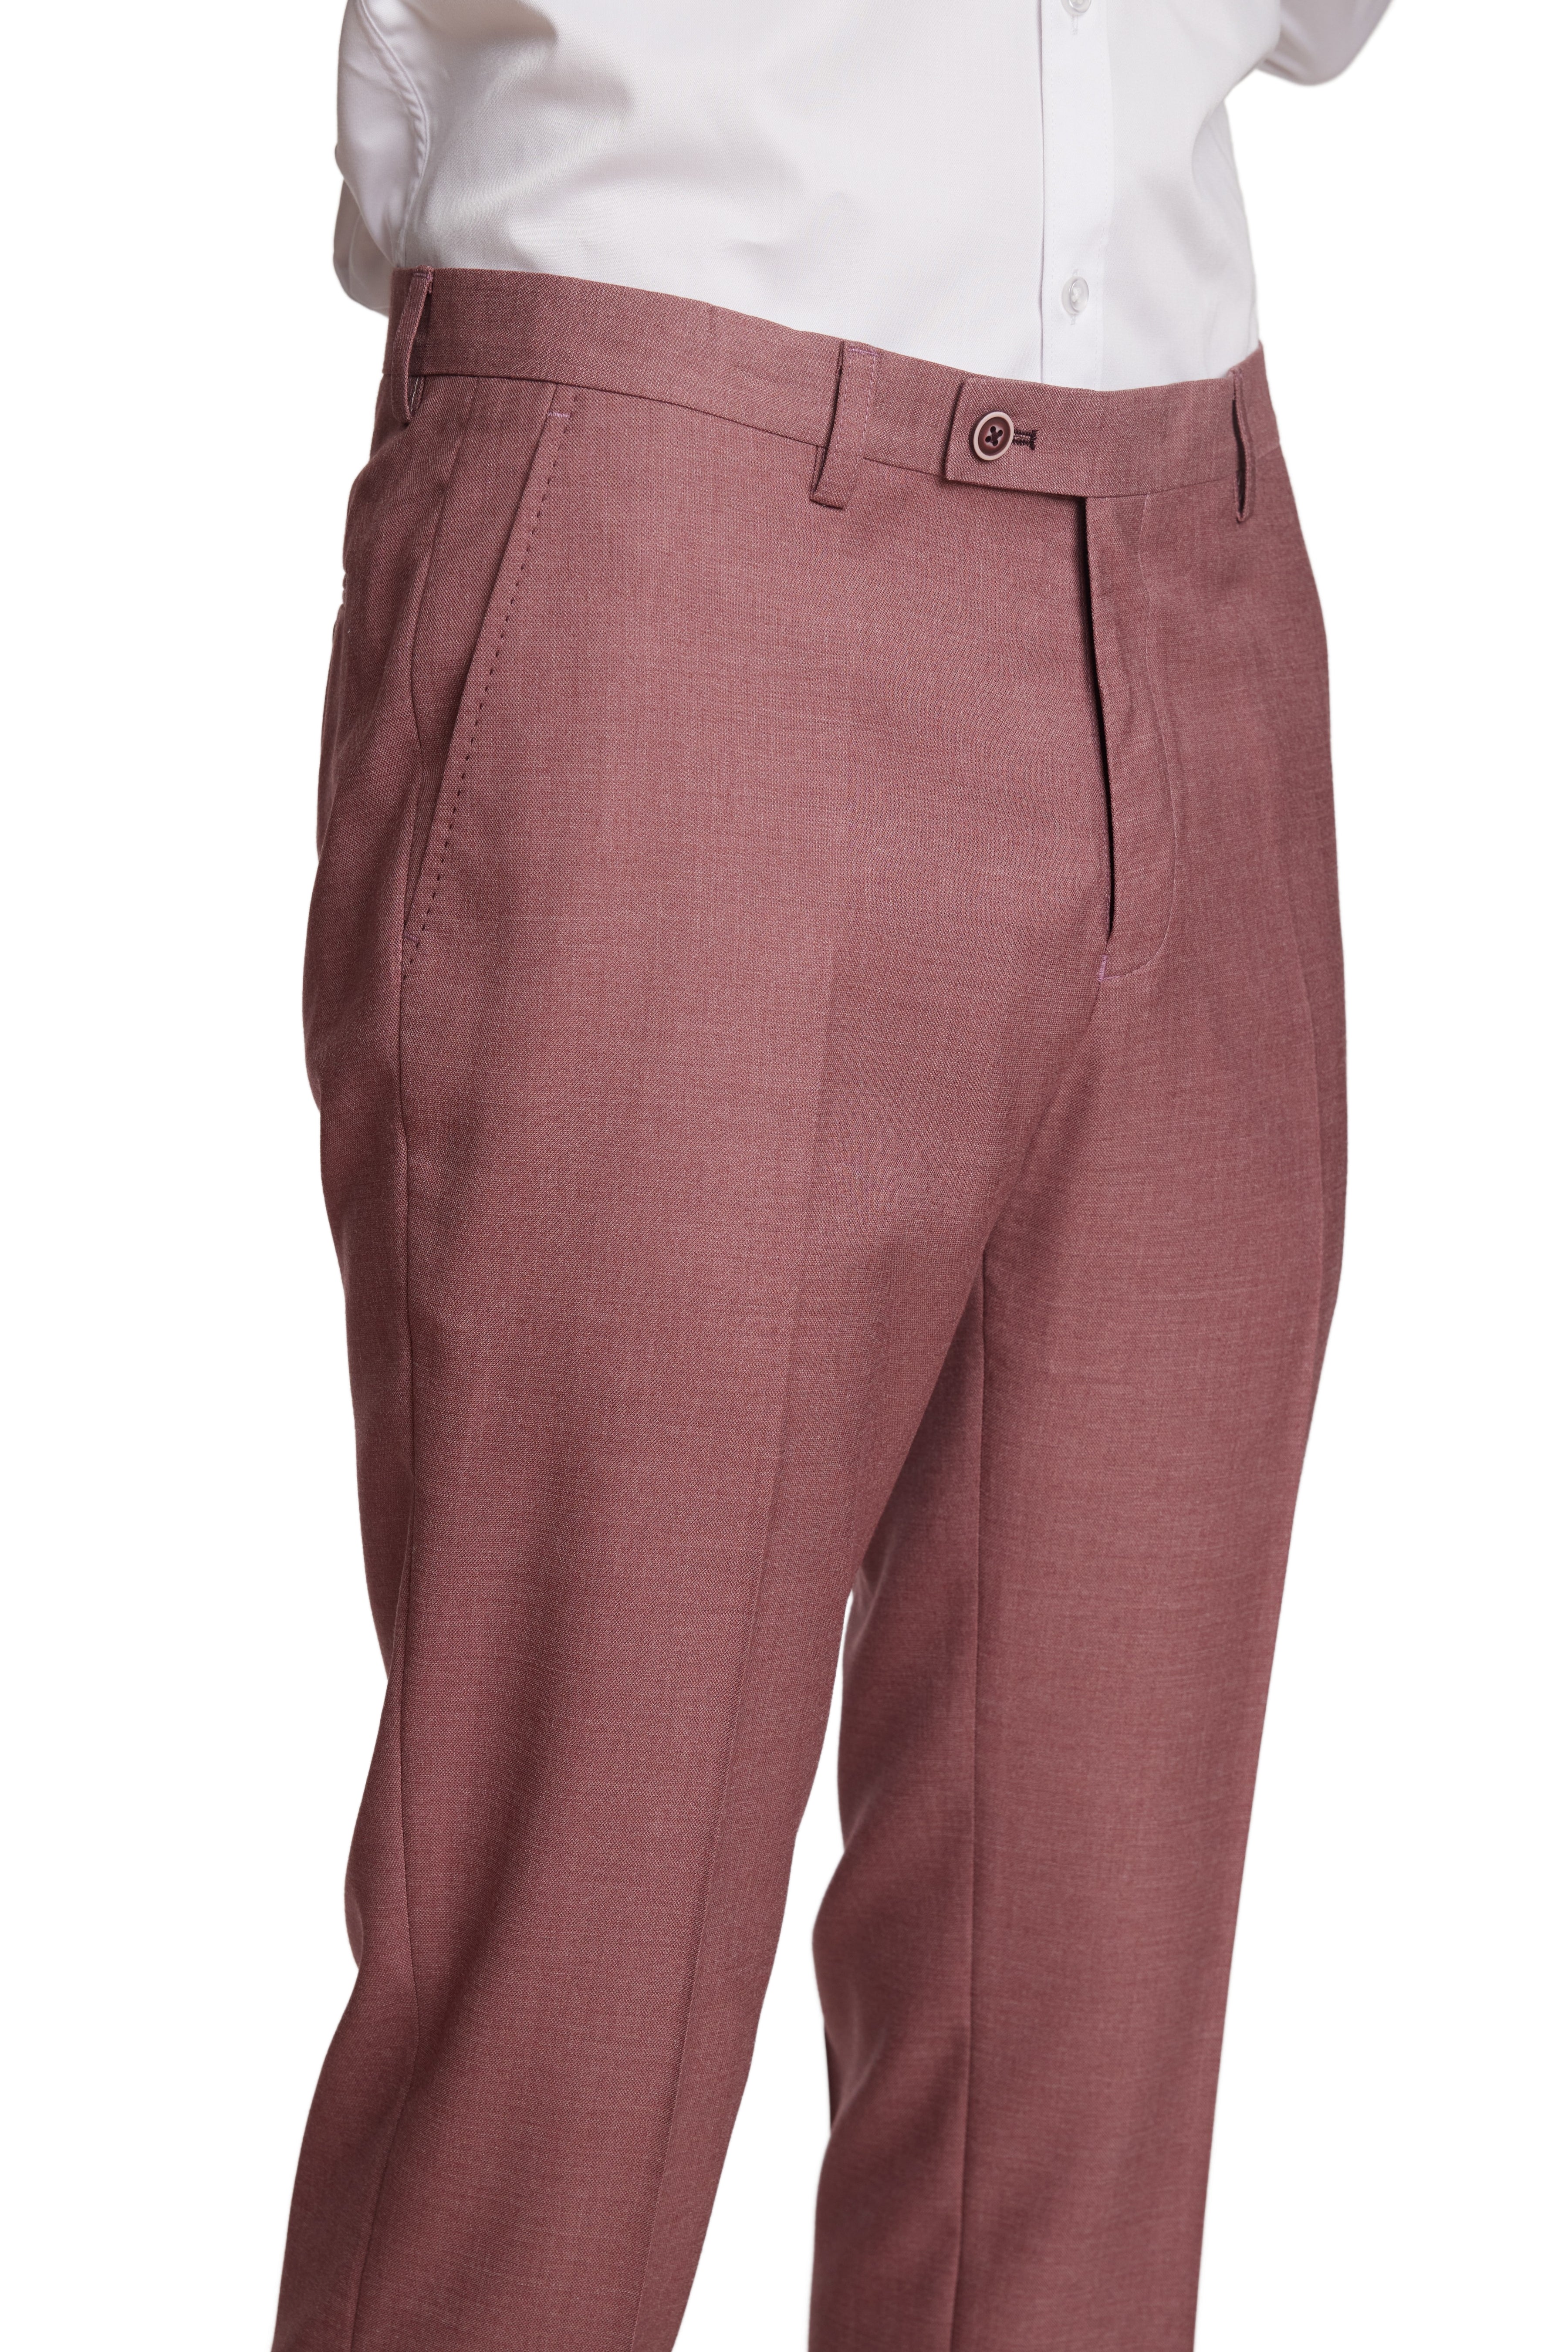 Downing Pants - slim - Dusted Pink